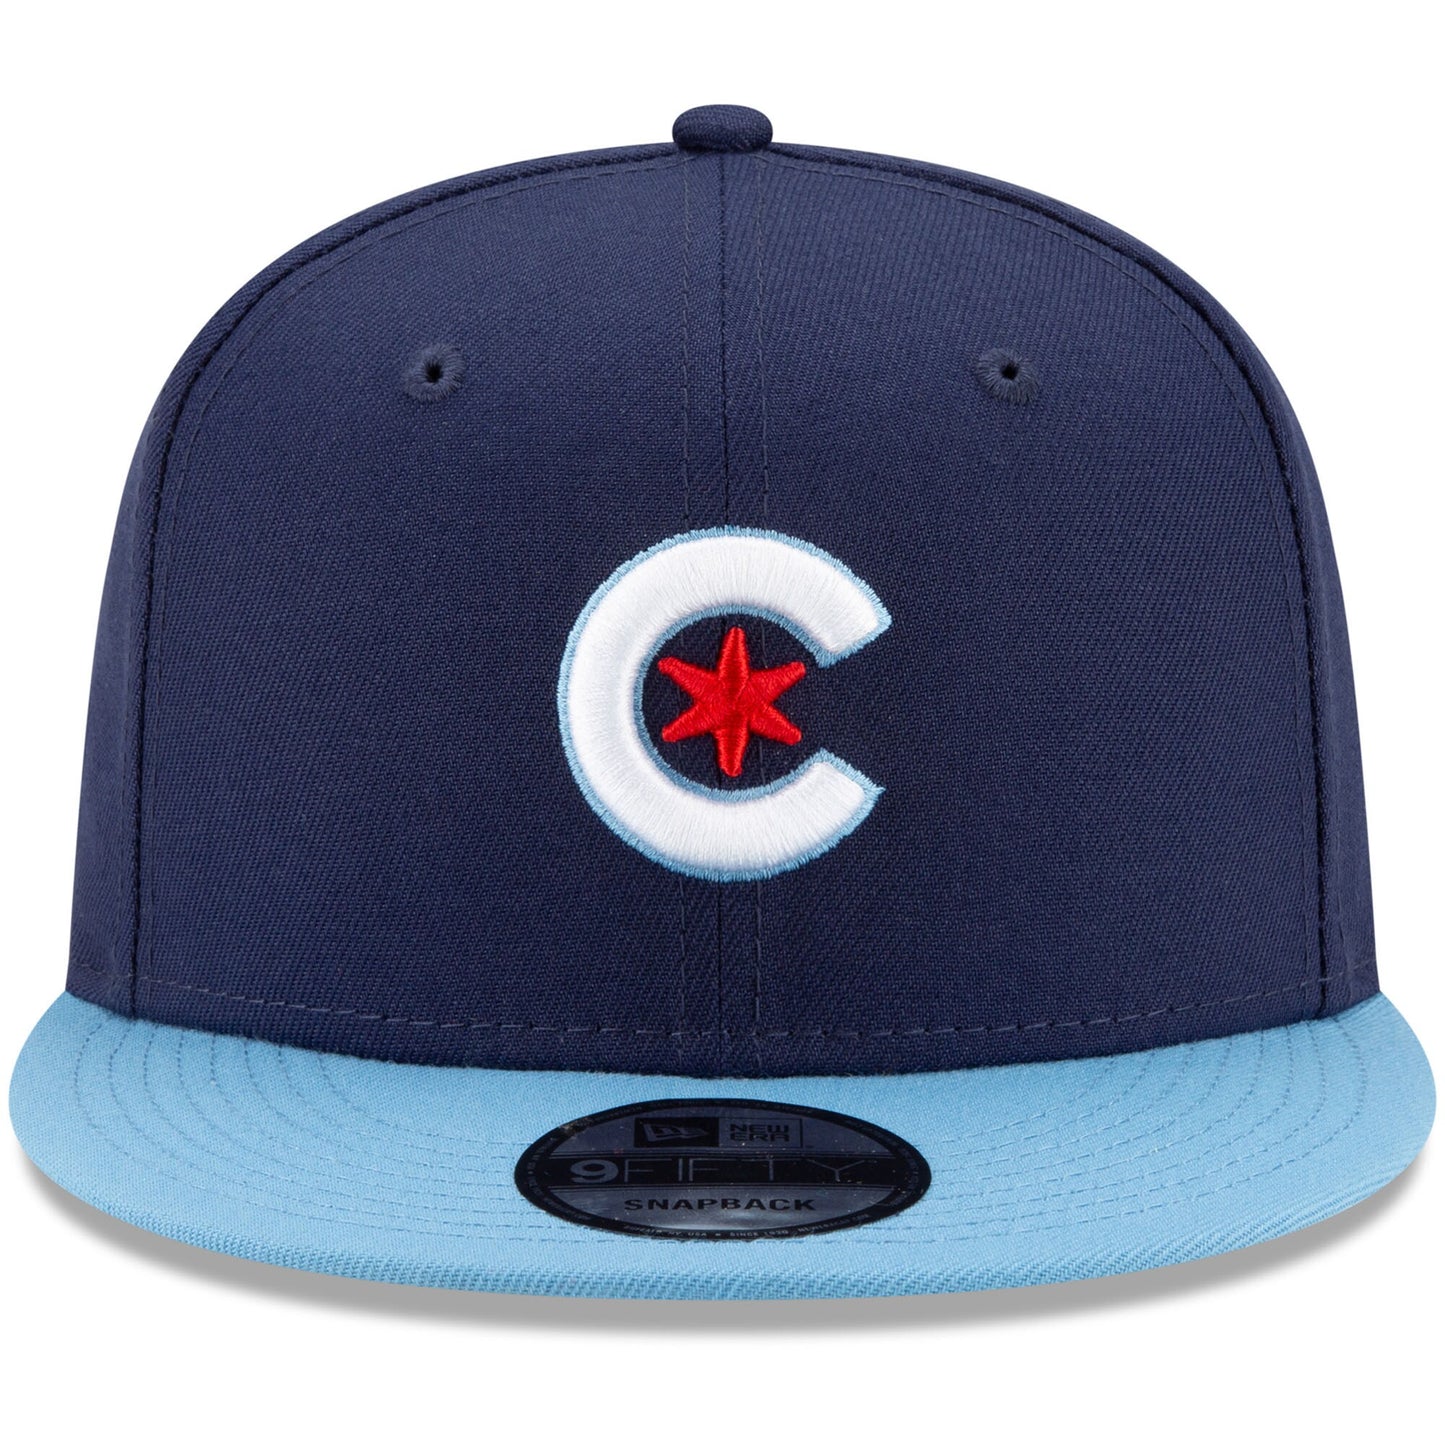 Men's Chicago Cubs New Era Navy/Light Blue City Connect 9FIFTY Snapback Adjustable Hat